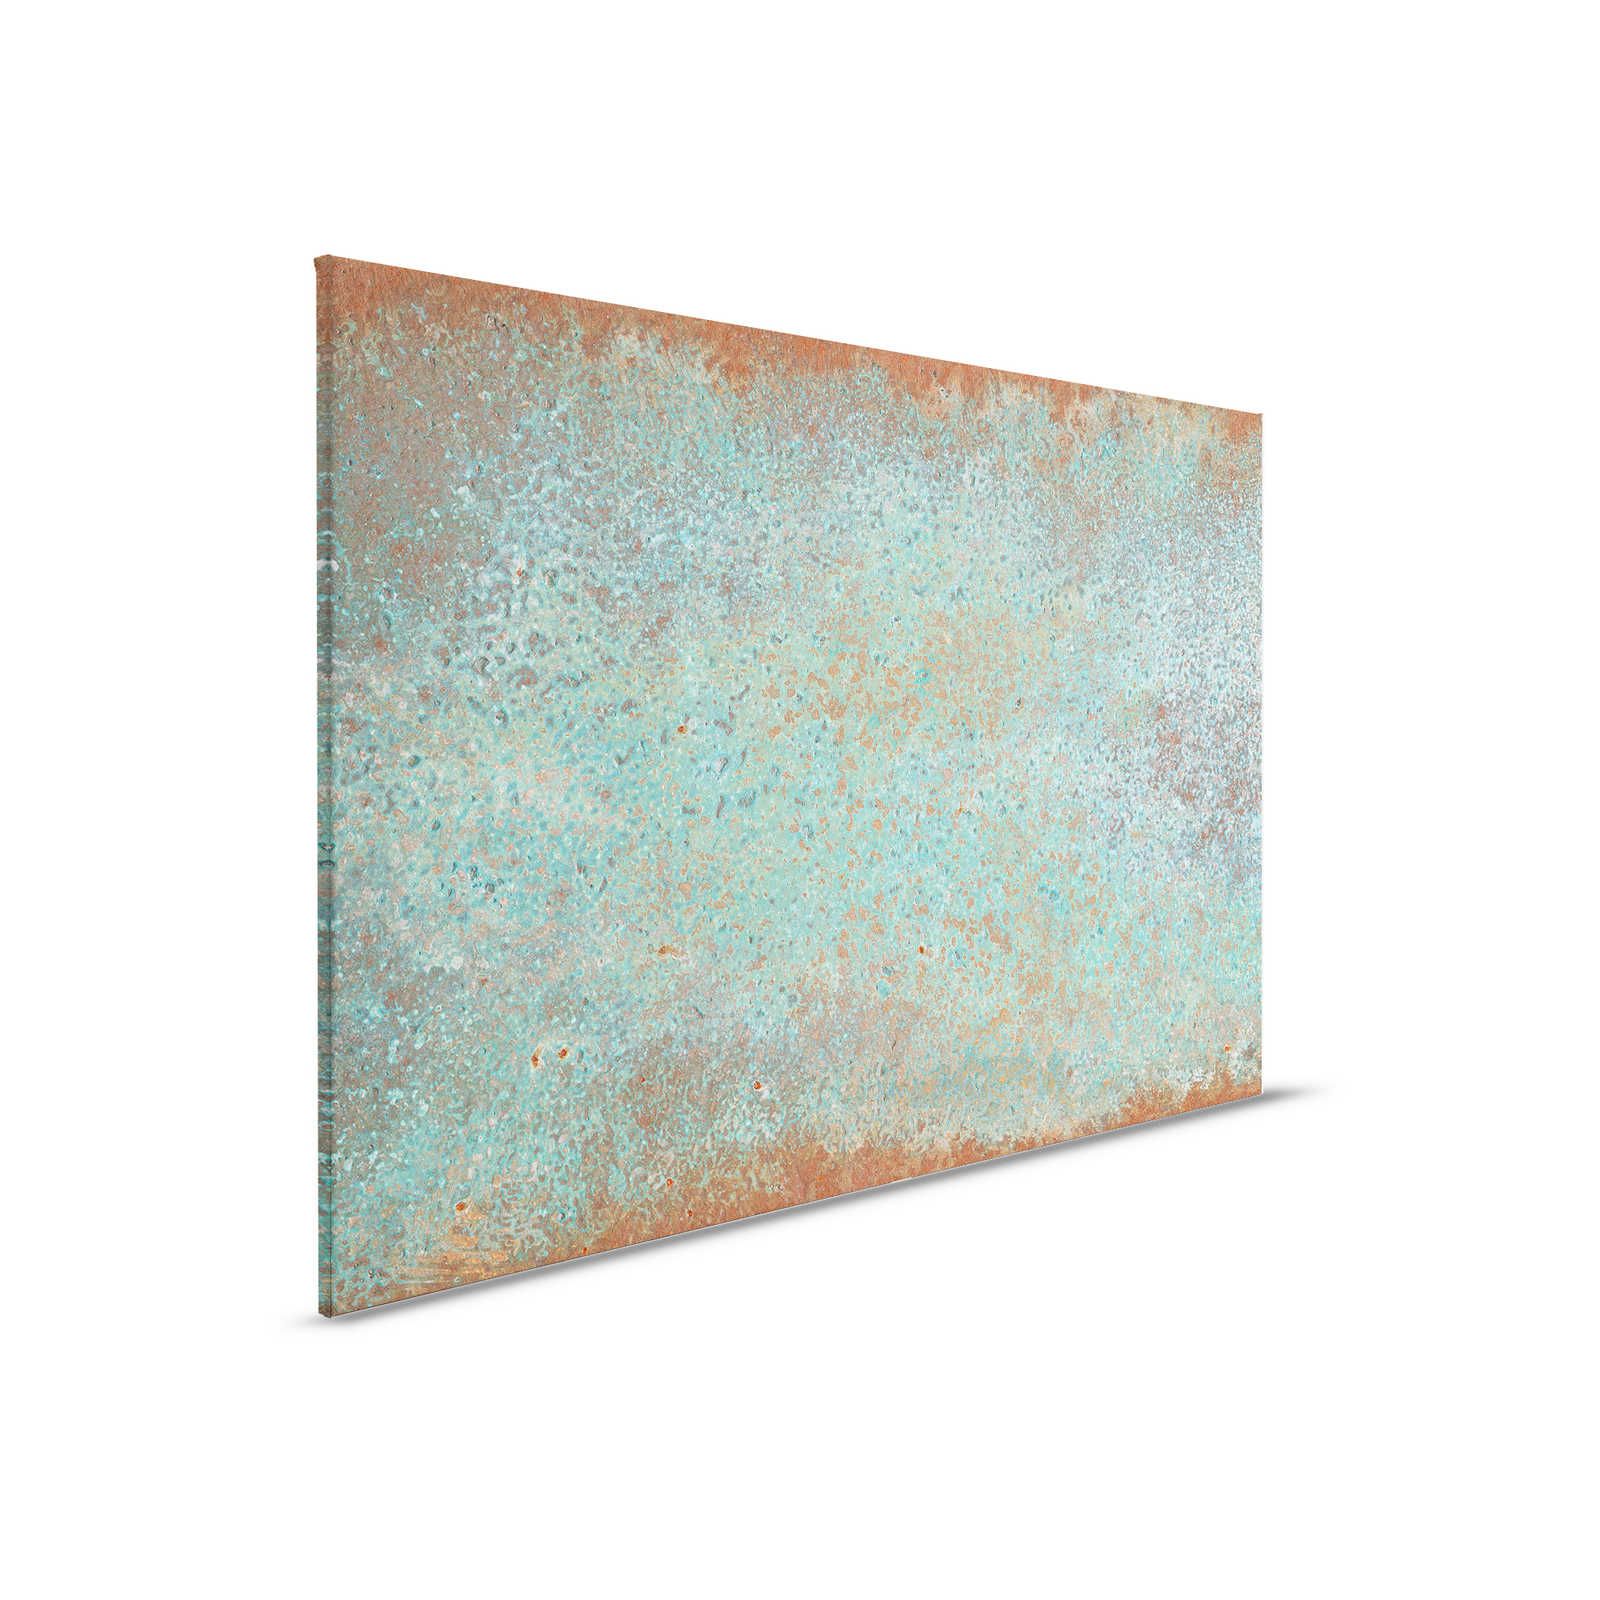         Metal Optics Canvas Painting Turquoise Patina with Rust - 0.90 m x 0.60 m
    